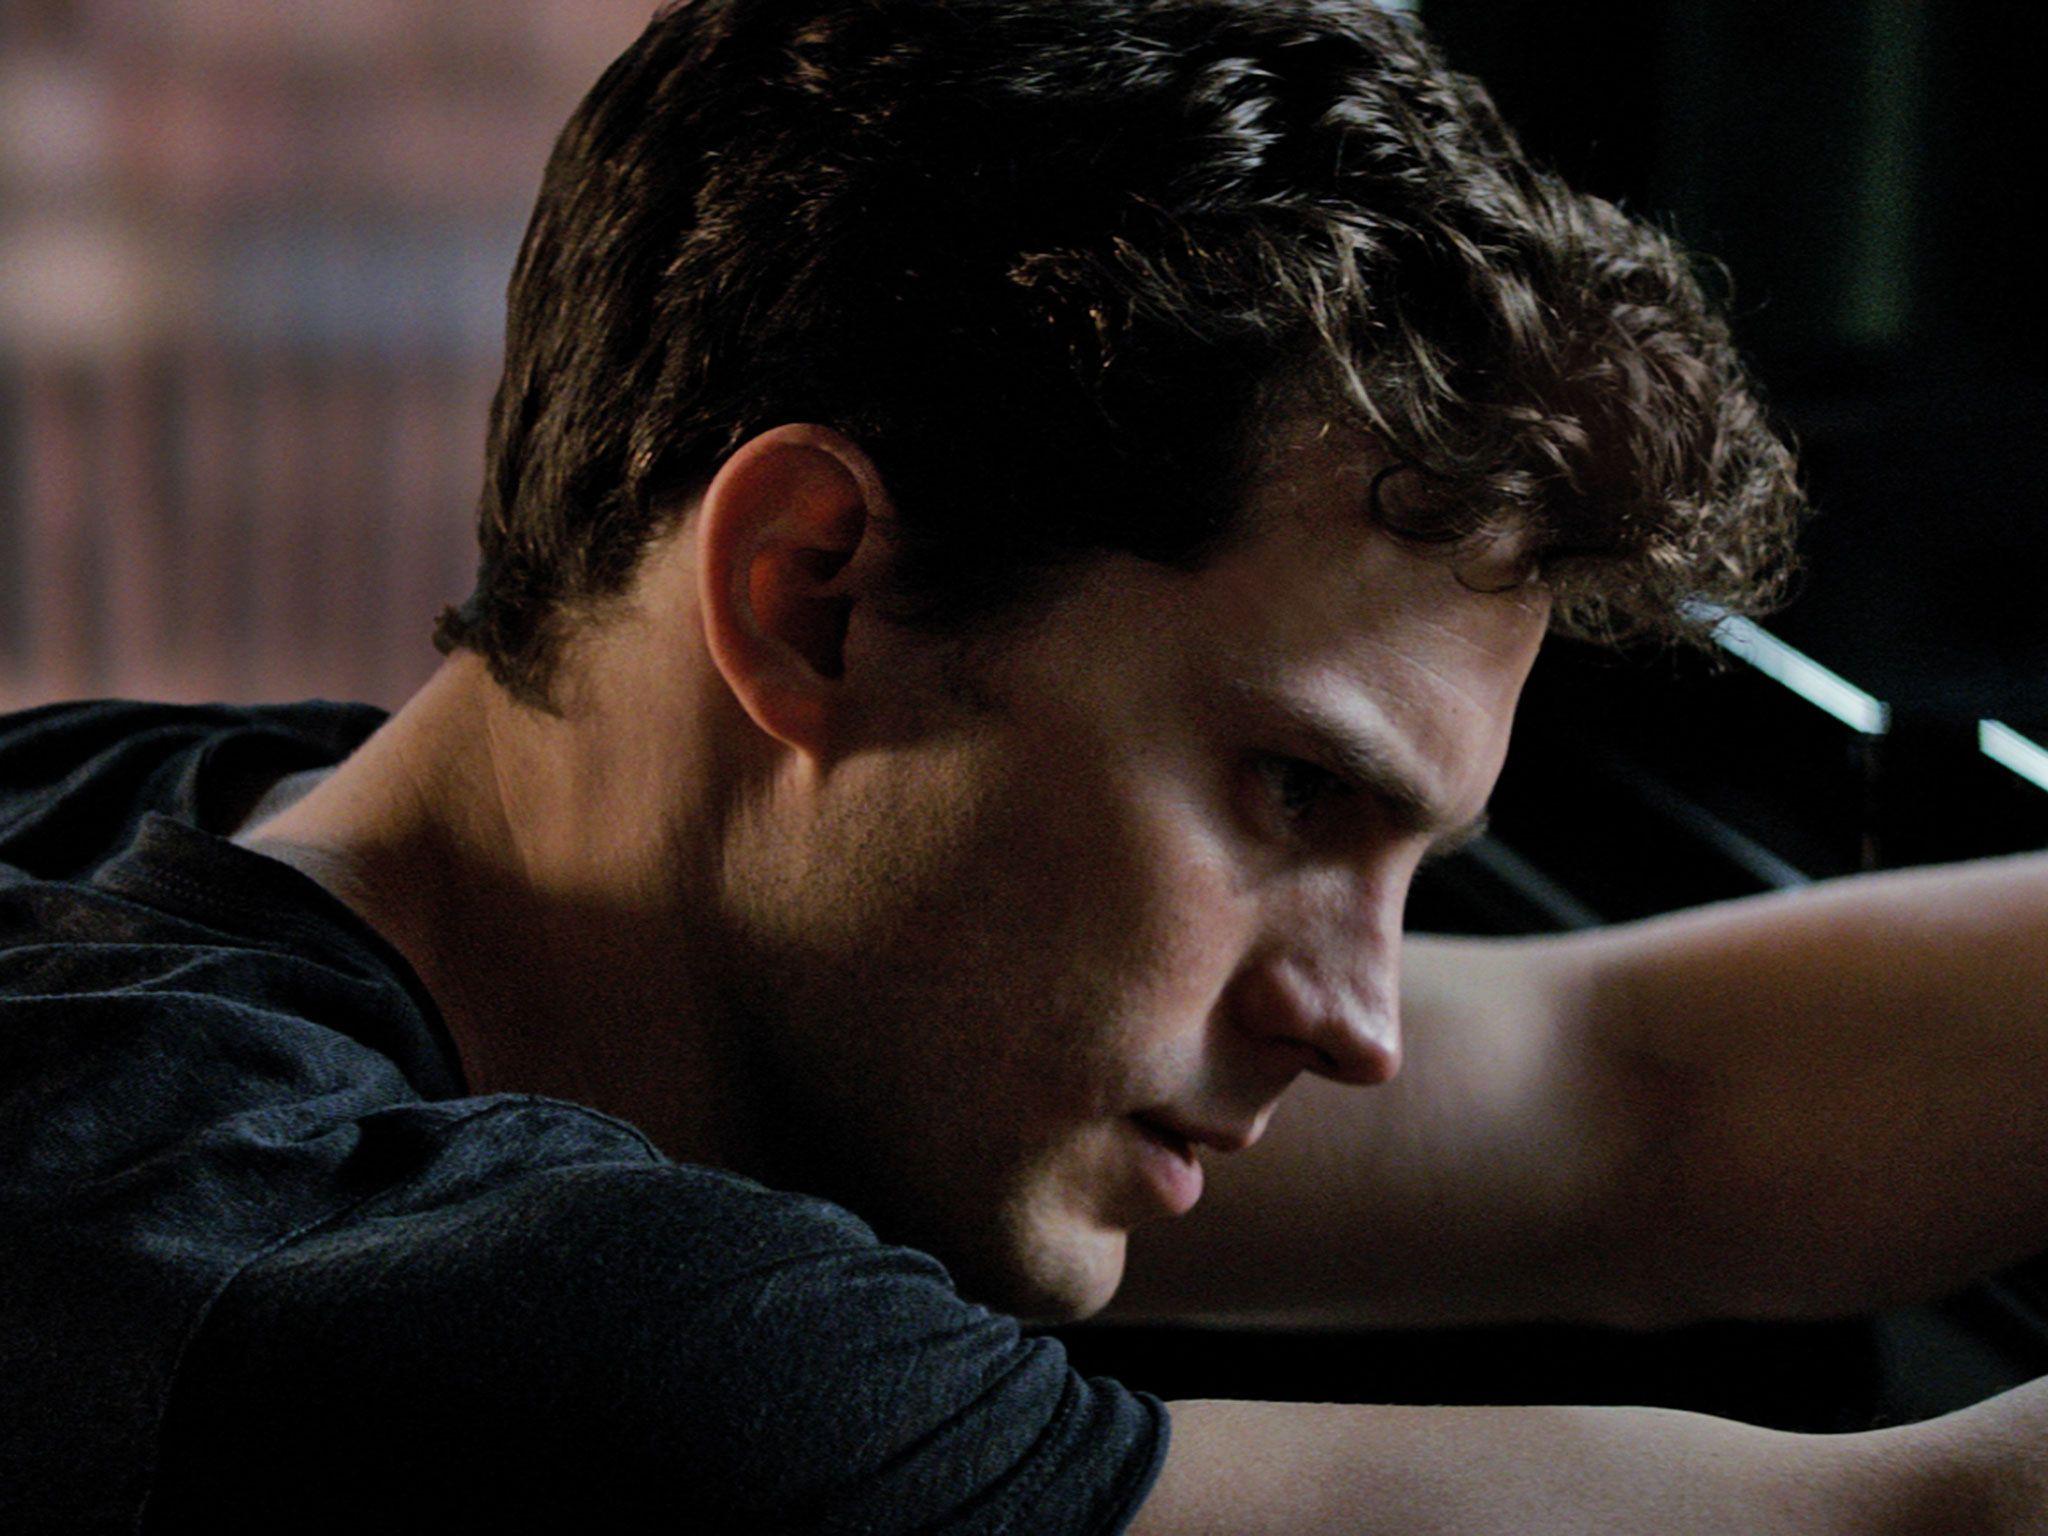 Fifty Shades of Grey movie sequels confirmed: Fifty Shades Darker.